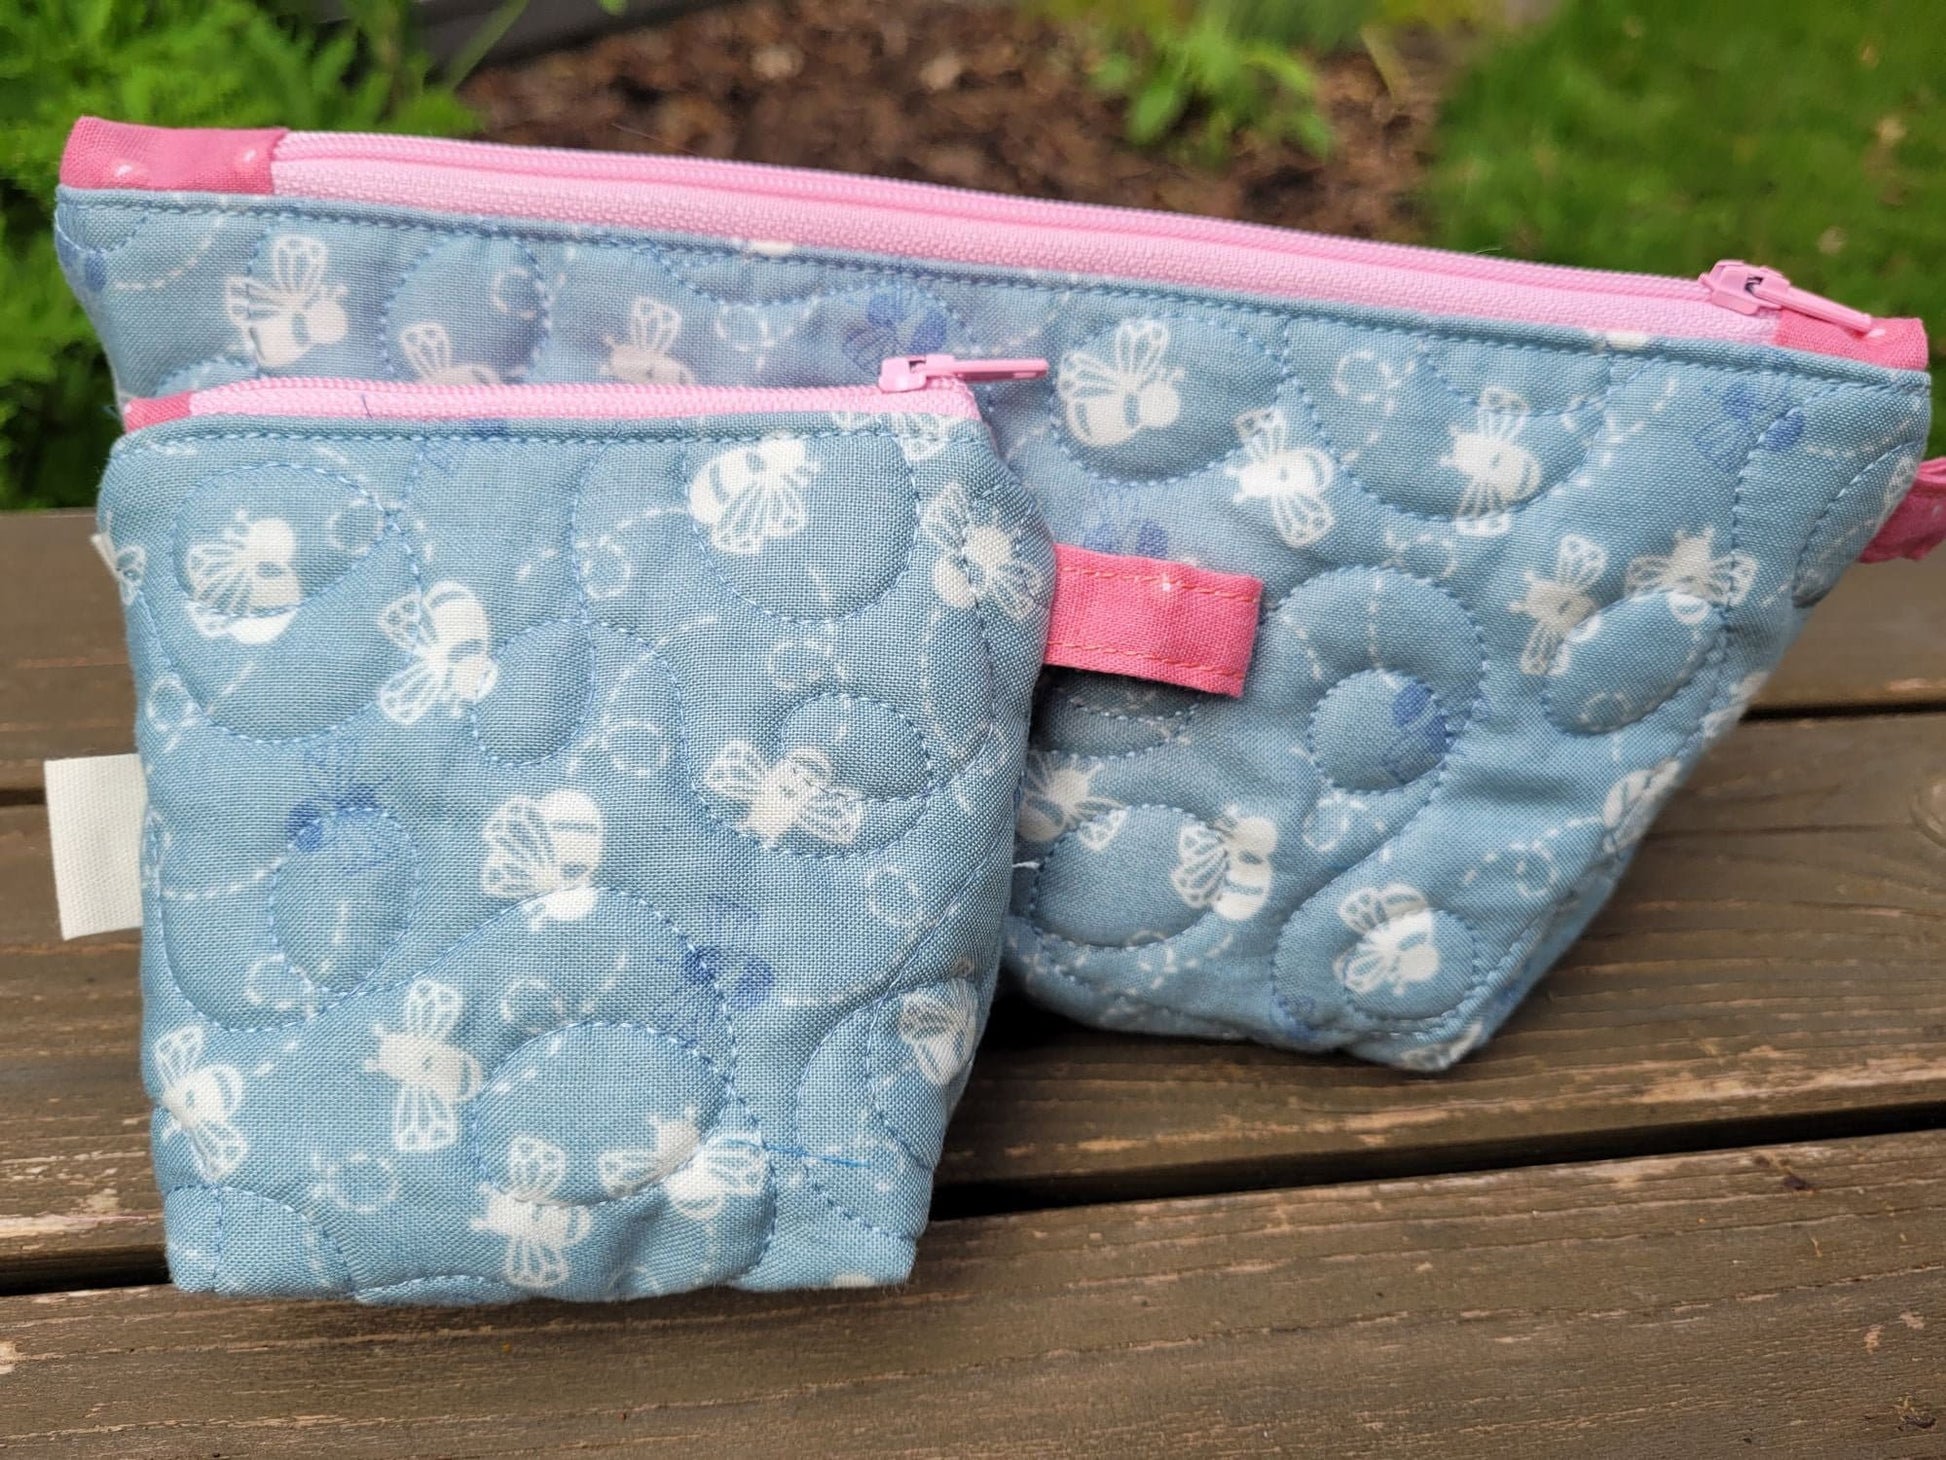 back view of small quilted bags